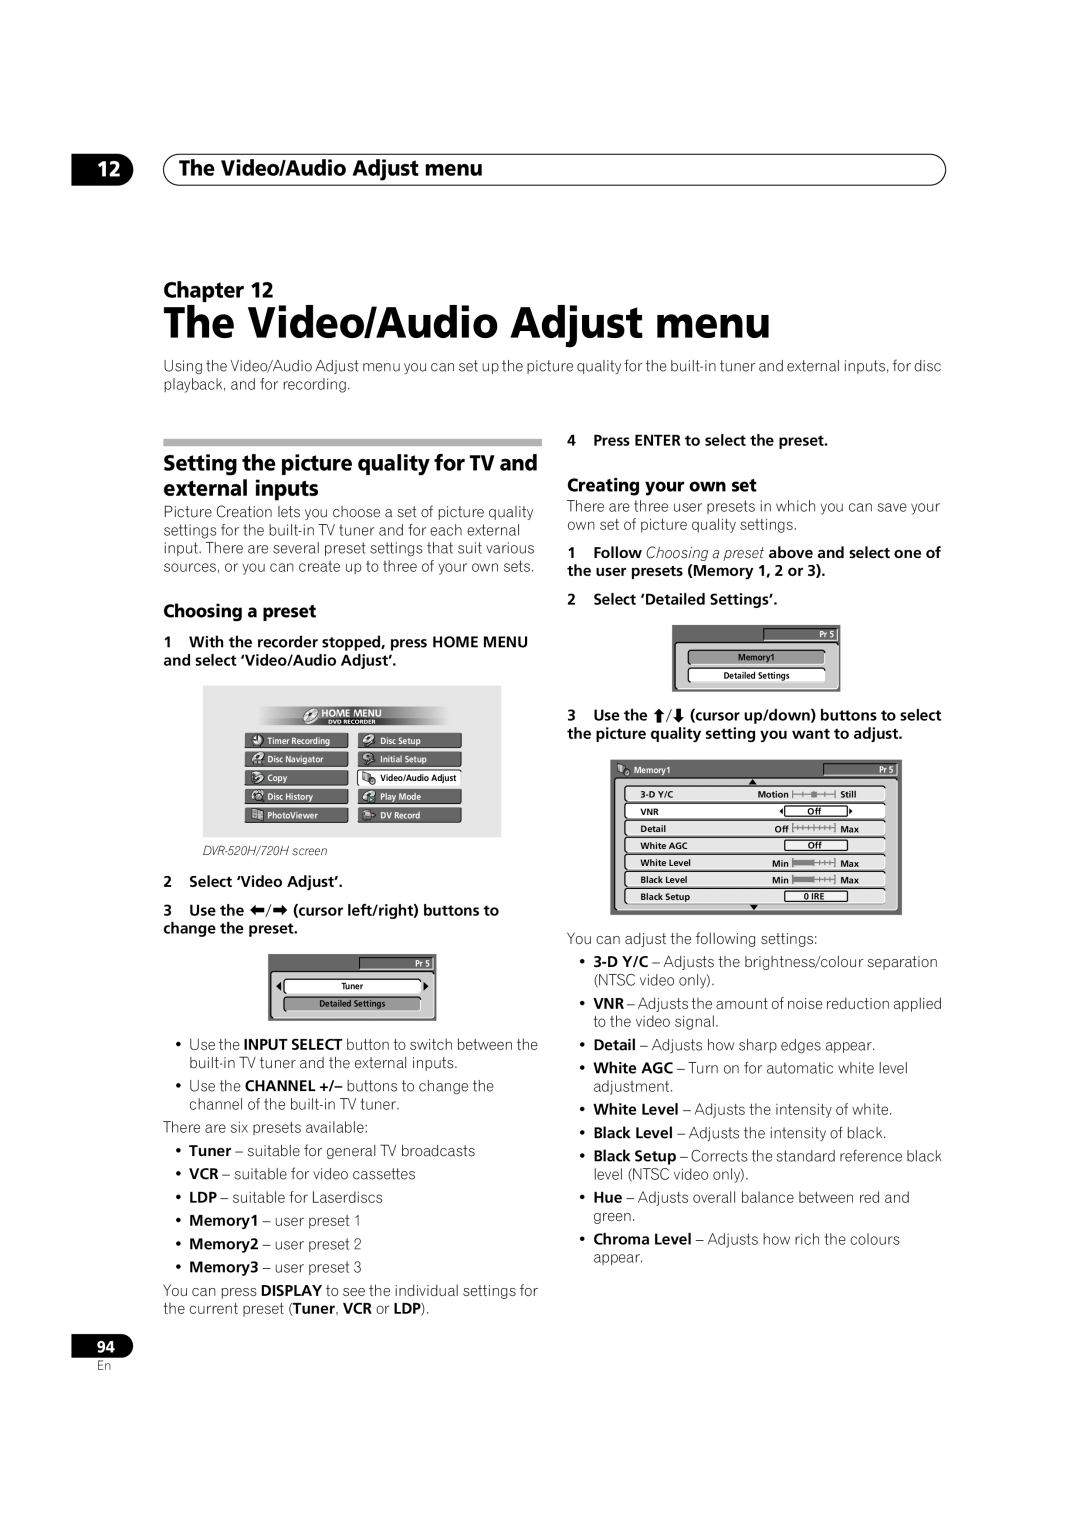 Pioneer DVR-720H, DVR-520H The Video/Audio Adjust menu Chapter, Setting the picture quality for TV and external inputs 